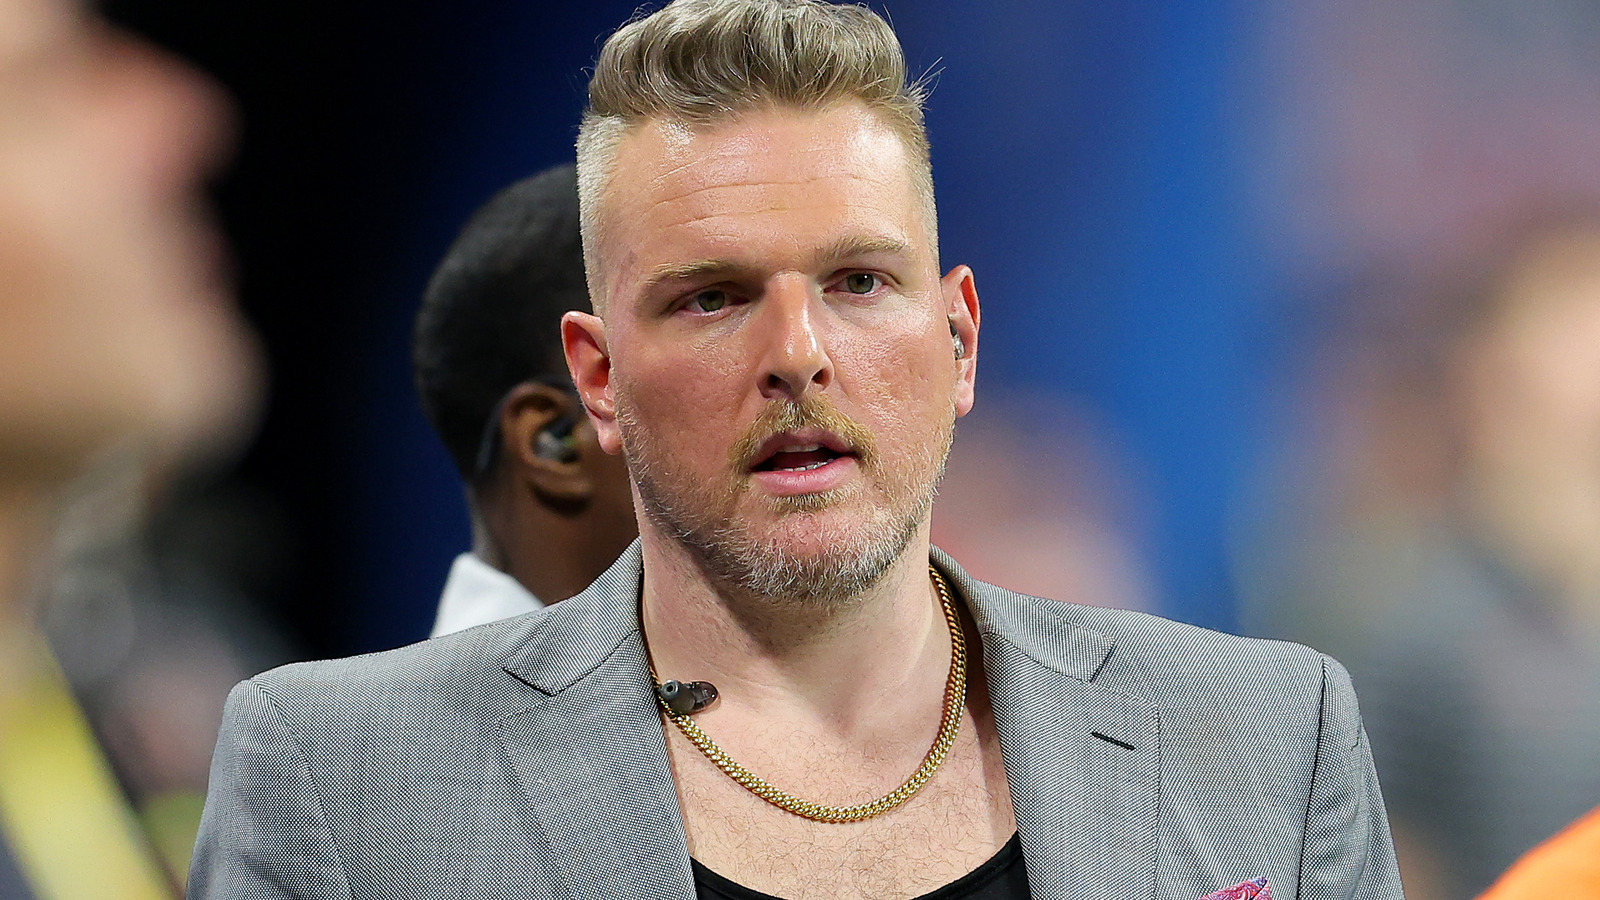 Pat McAfee Teases Return To WWE In Wake Of Kevin Patrick Release